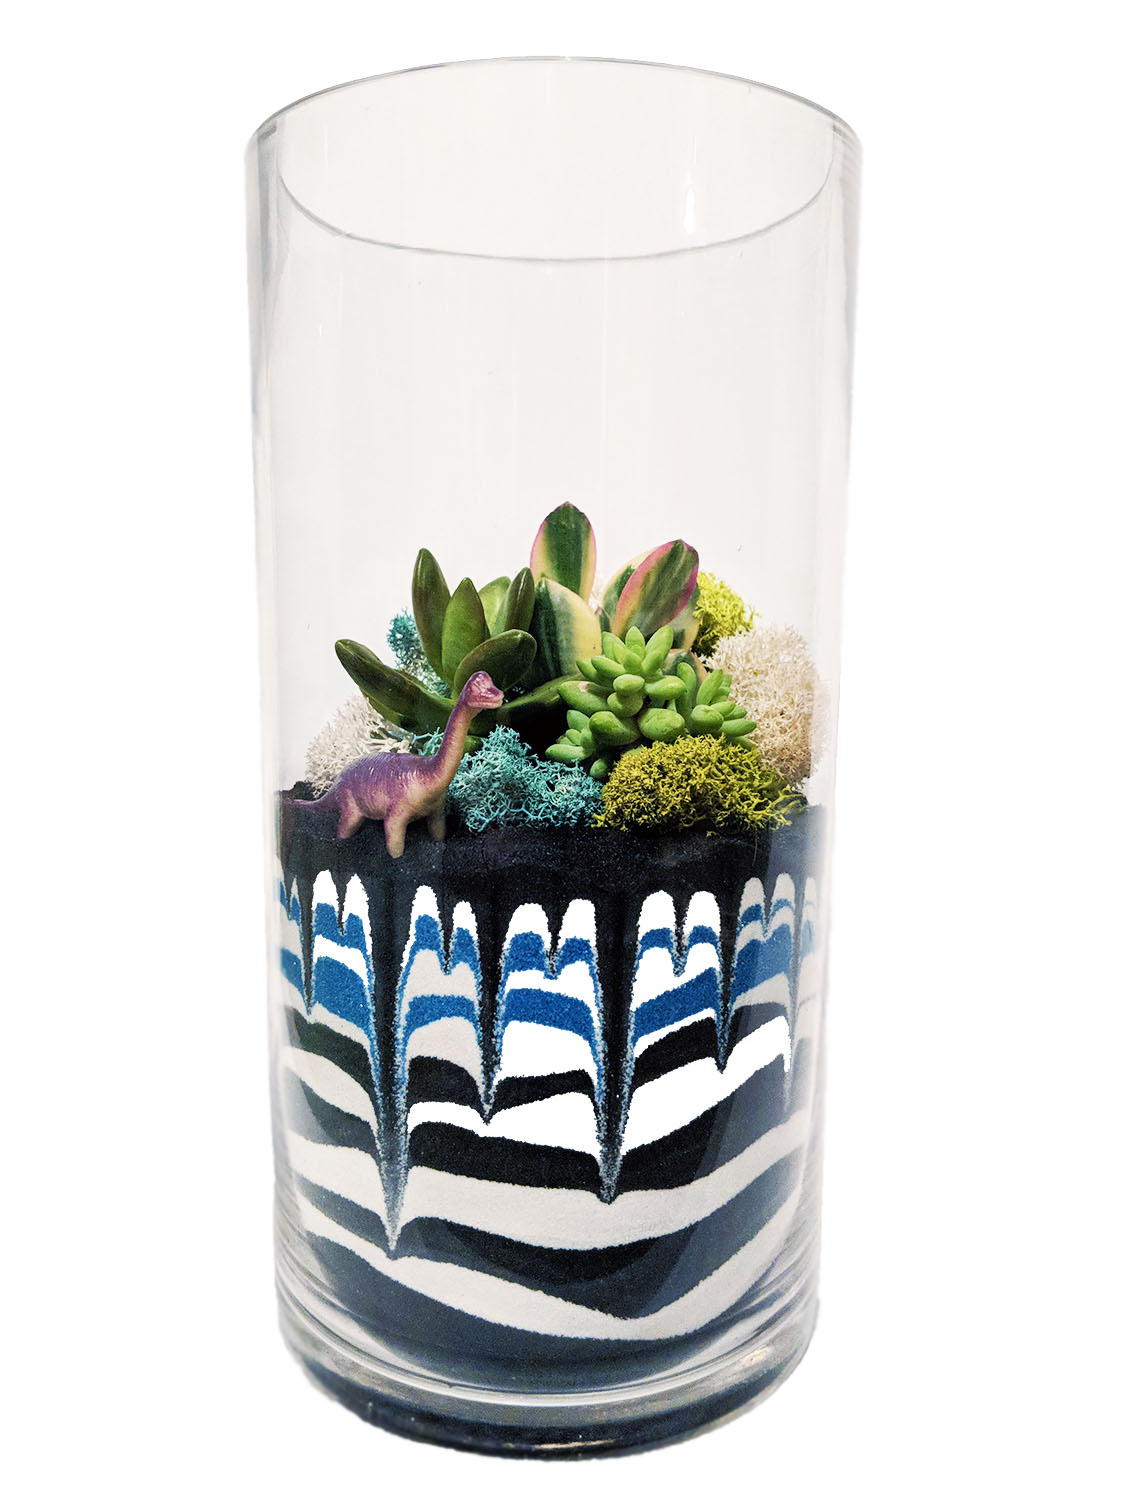 A Modern Sand Art Succulents in Gorgeous Glass Vase plant nite project by Yaymaker